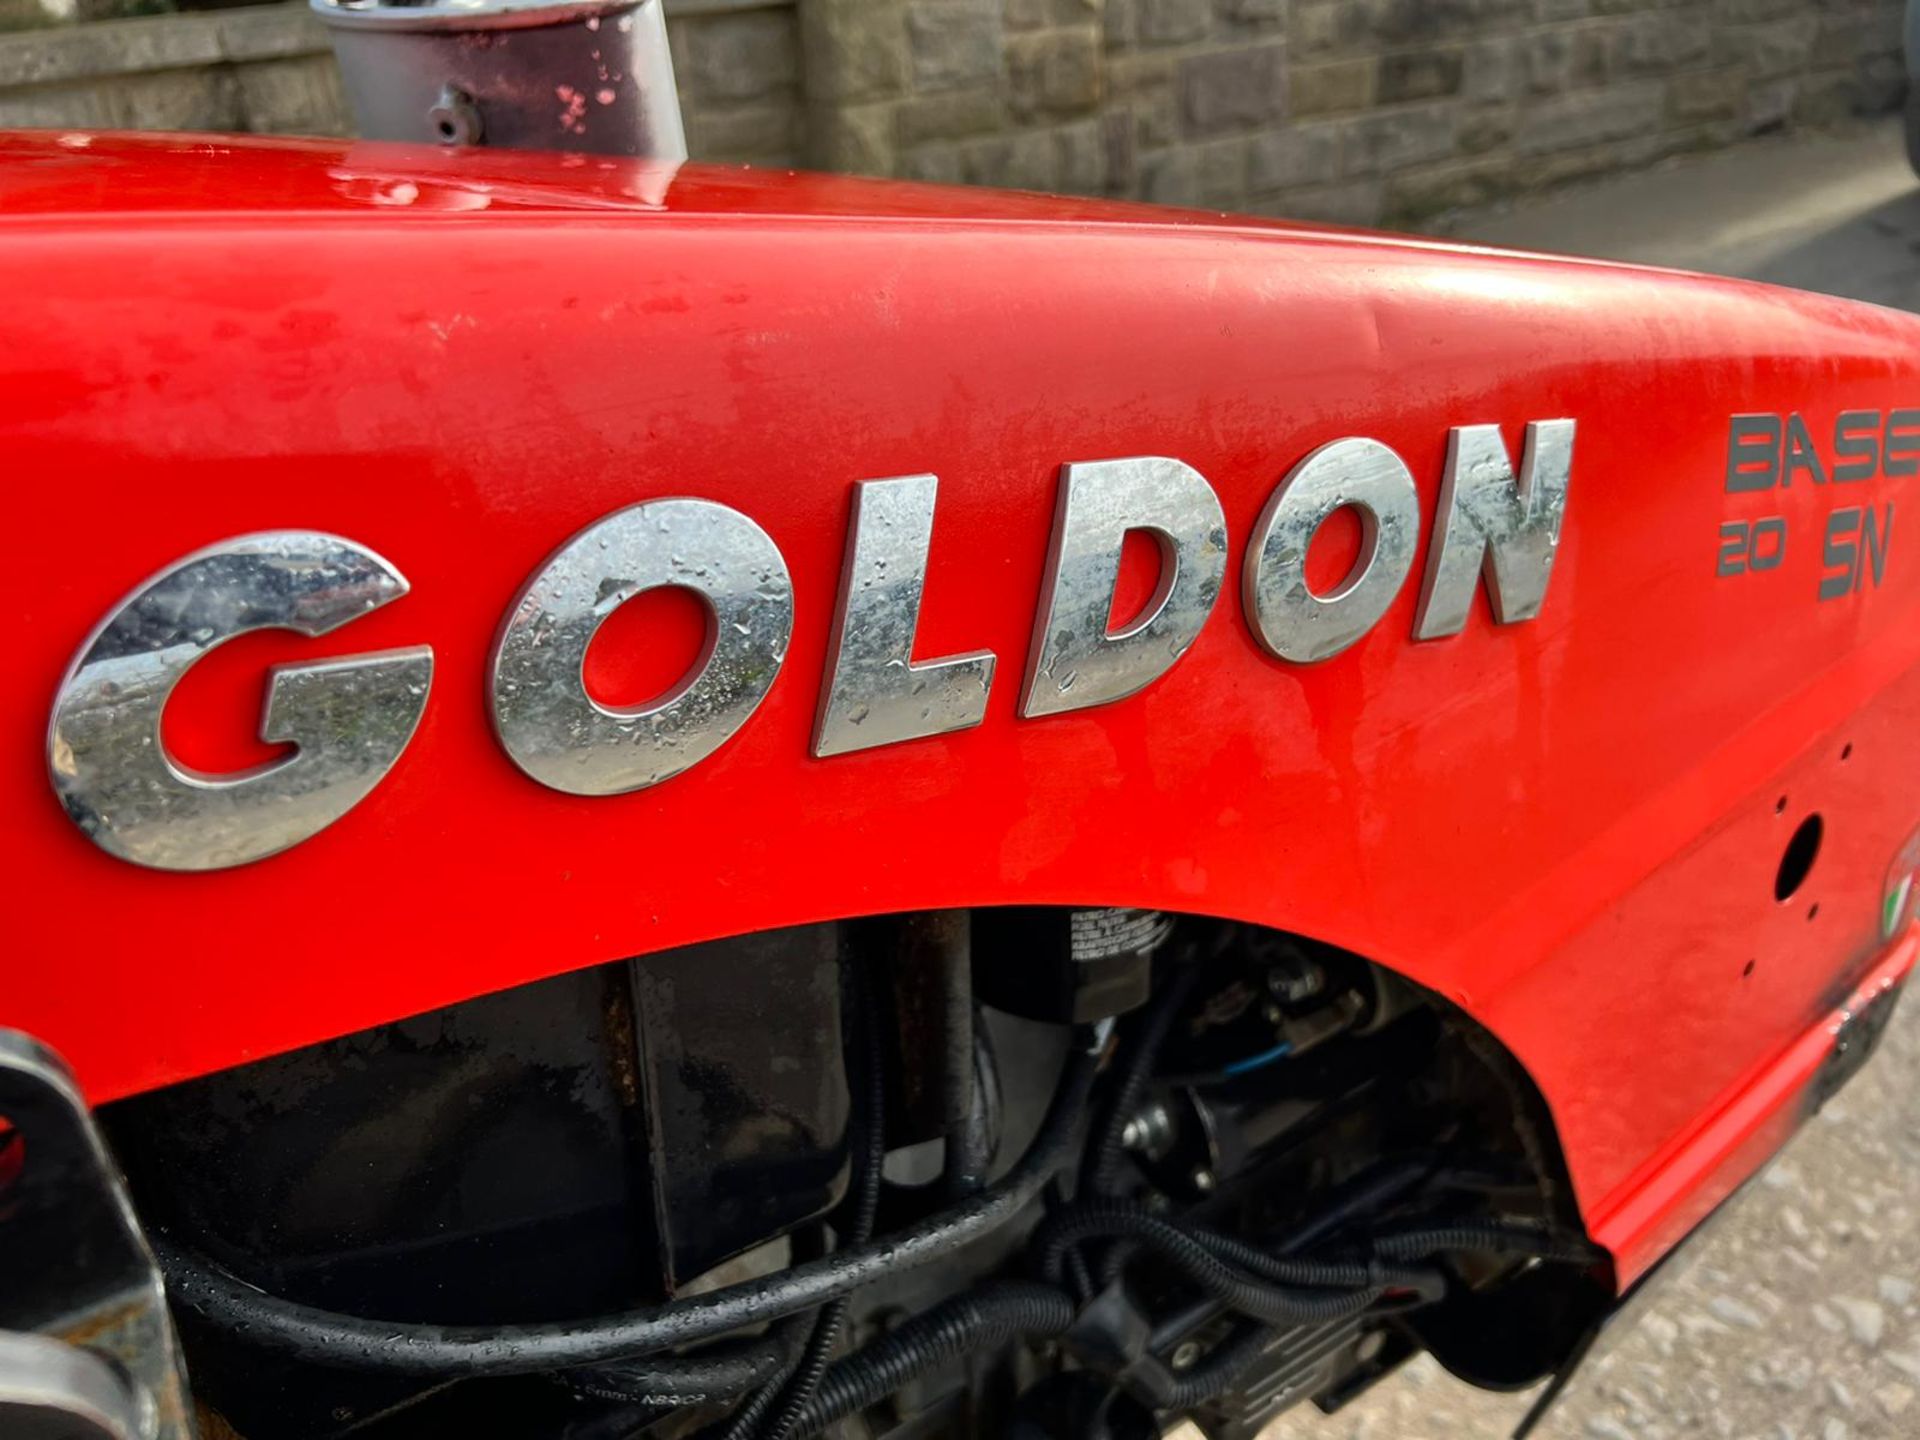 2016 Goldoni Base 20 SN 4WD Articulated Compact Tractor, Runs Drives And Works *PLUS VAT* - Image 17 of 18